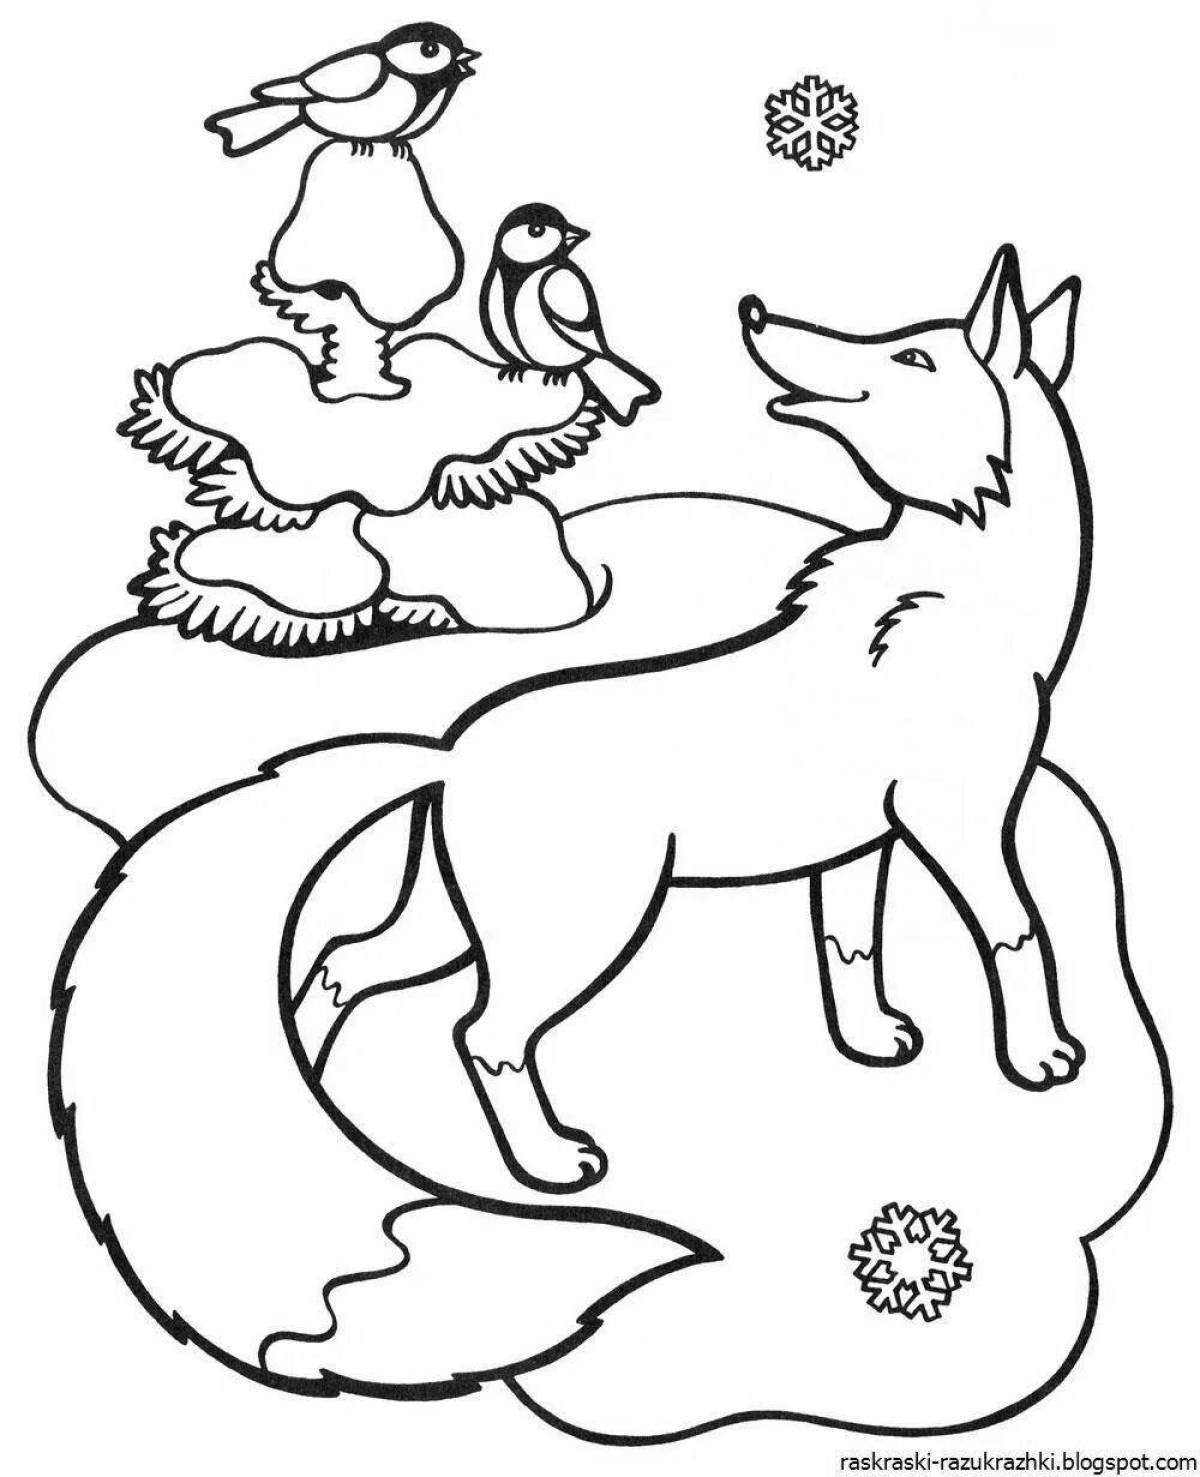 Outstanding winter animals coloring book for 3-4 year olds